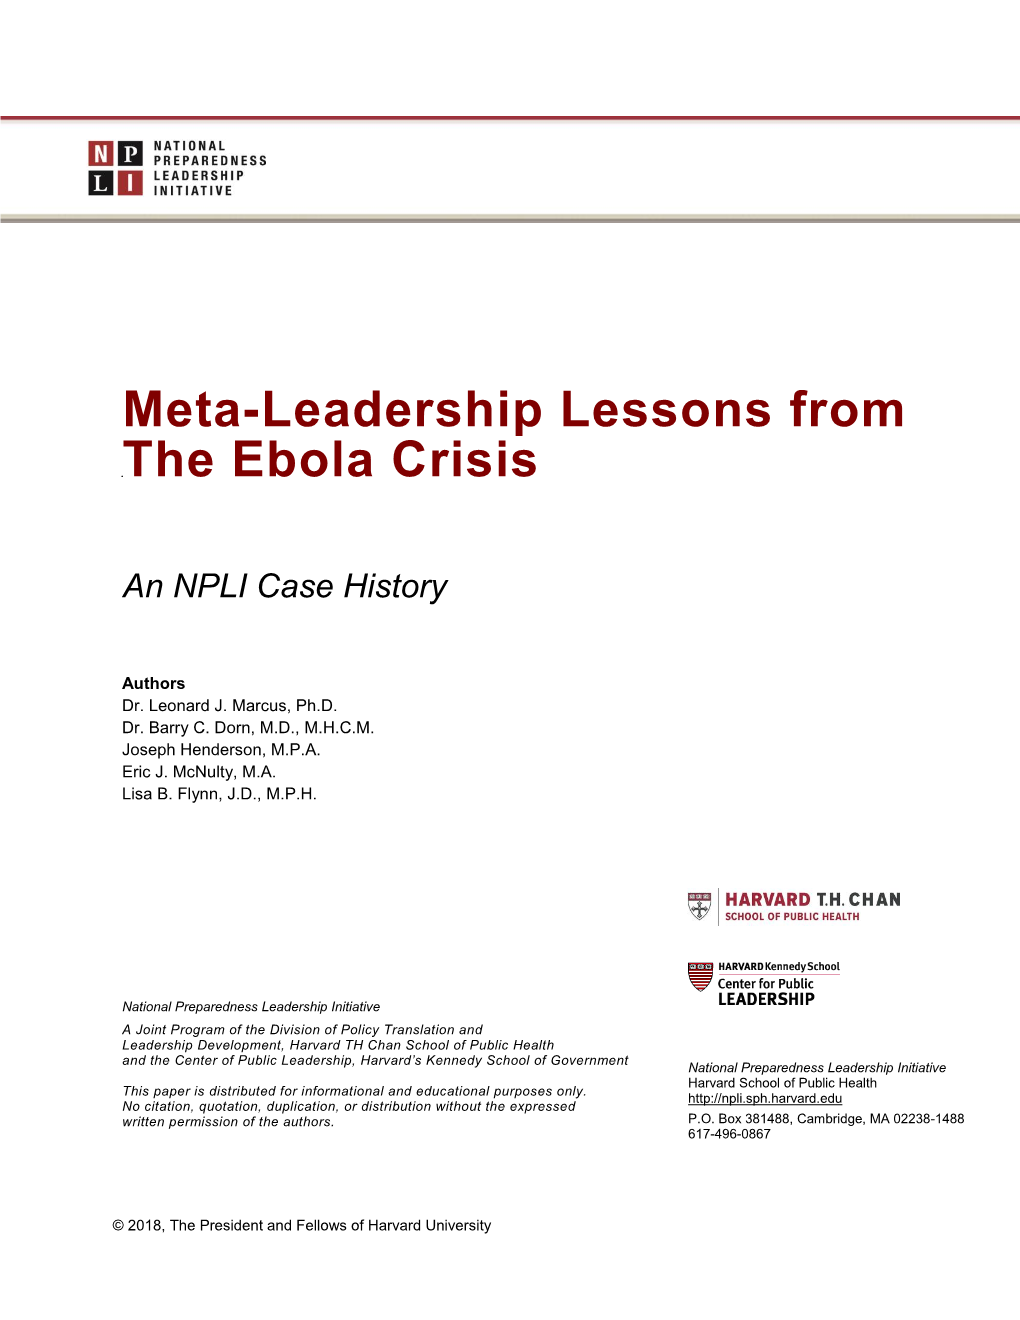 Meta-Leadership Lessons from the Ebola Crisis